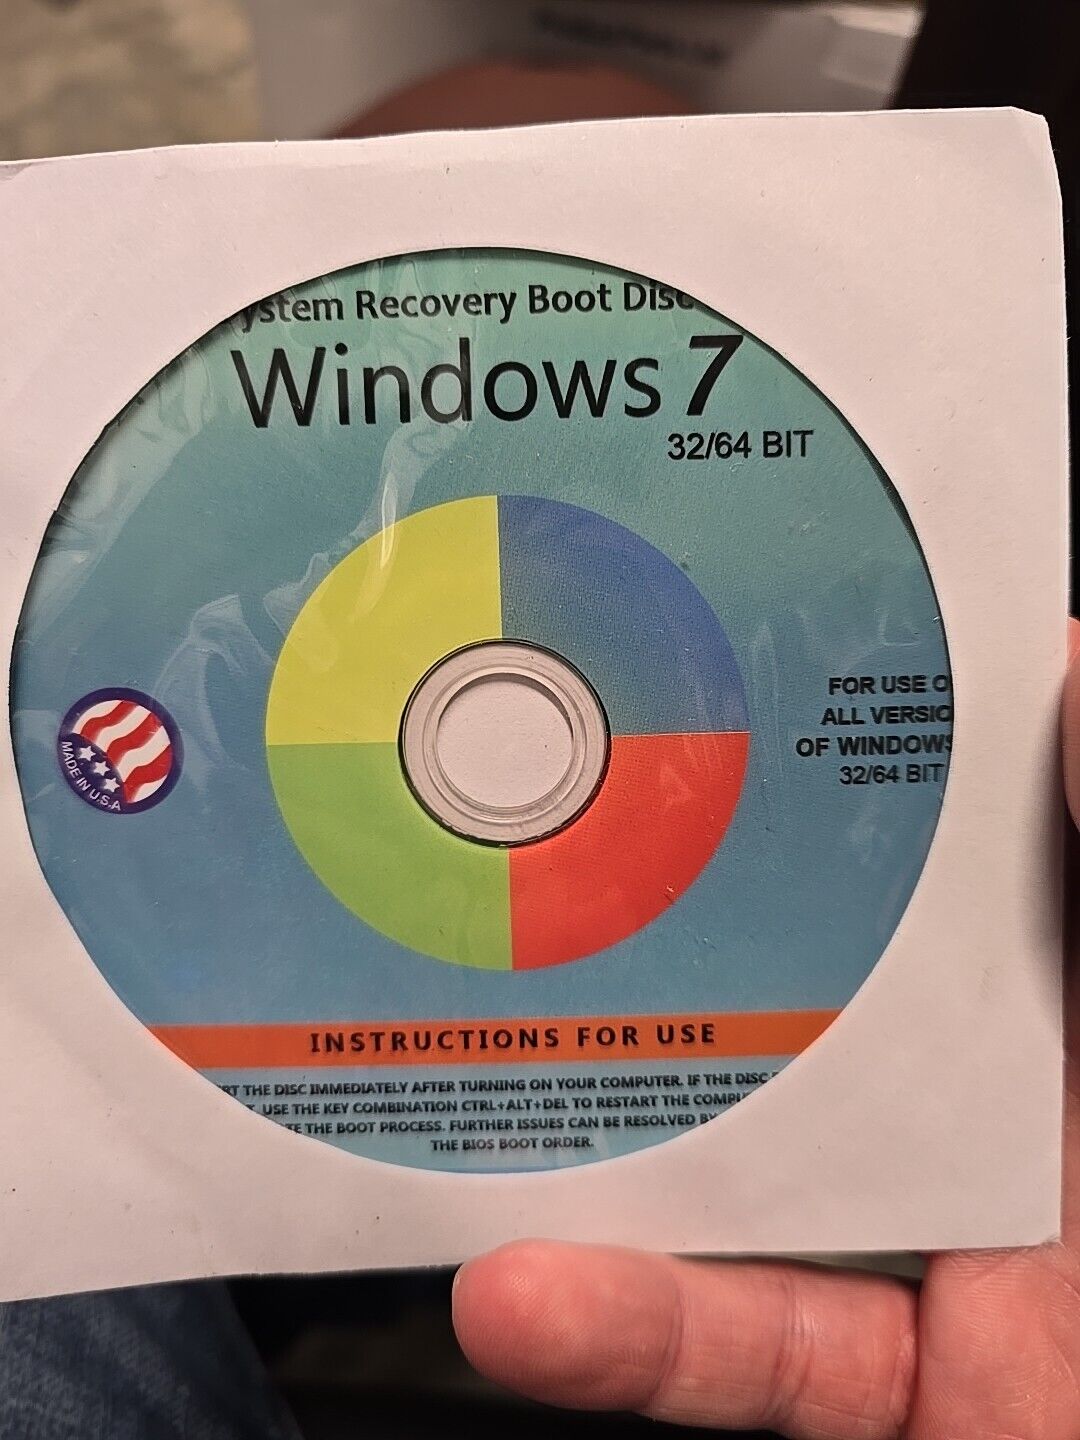 NEW-Ralix System Recovery Repair Boot Disc DVD For Windows 7 All Versions 32/64